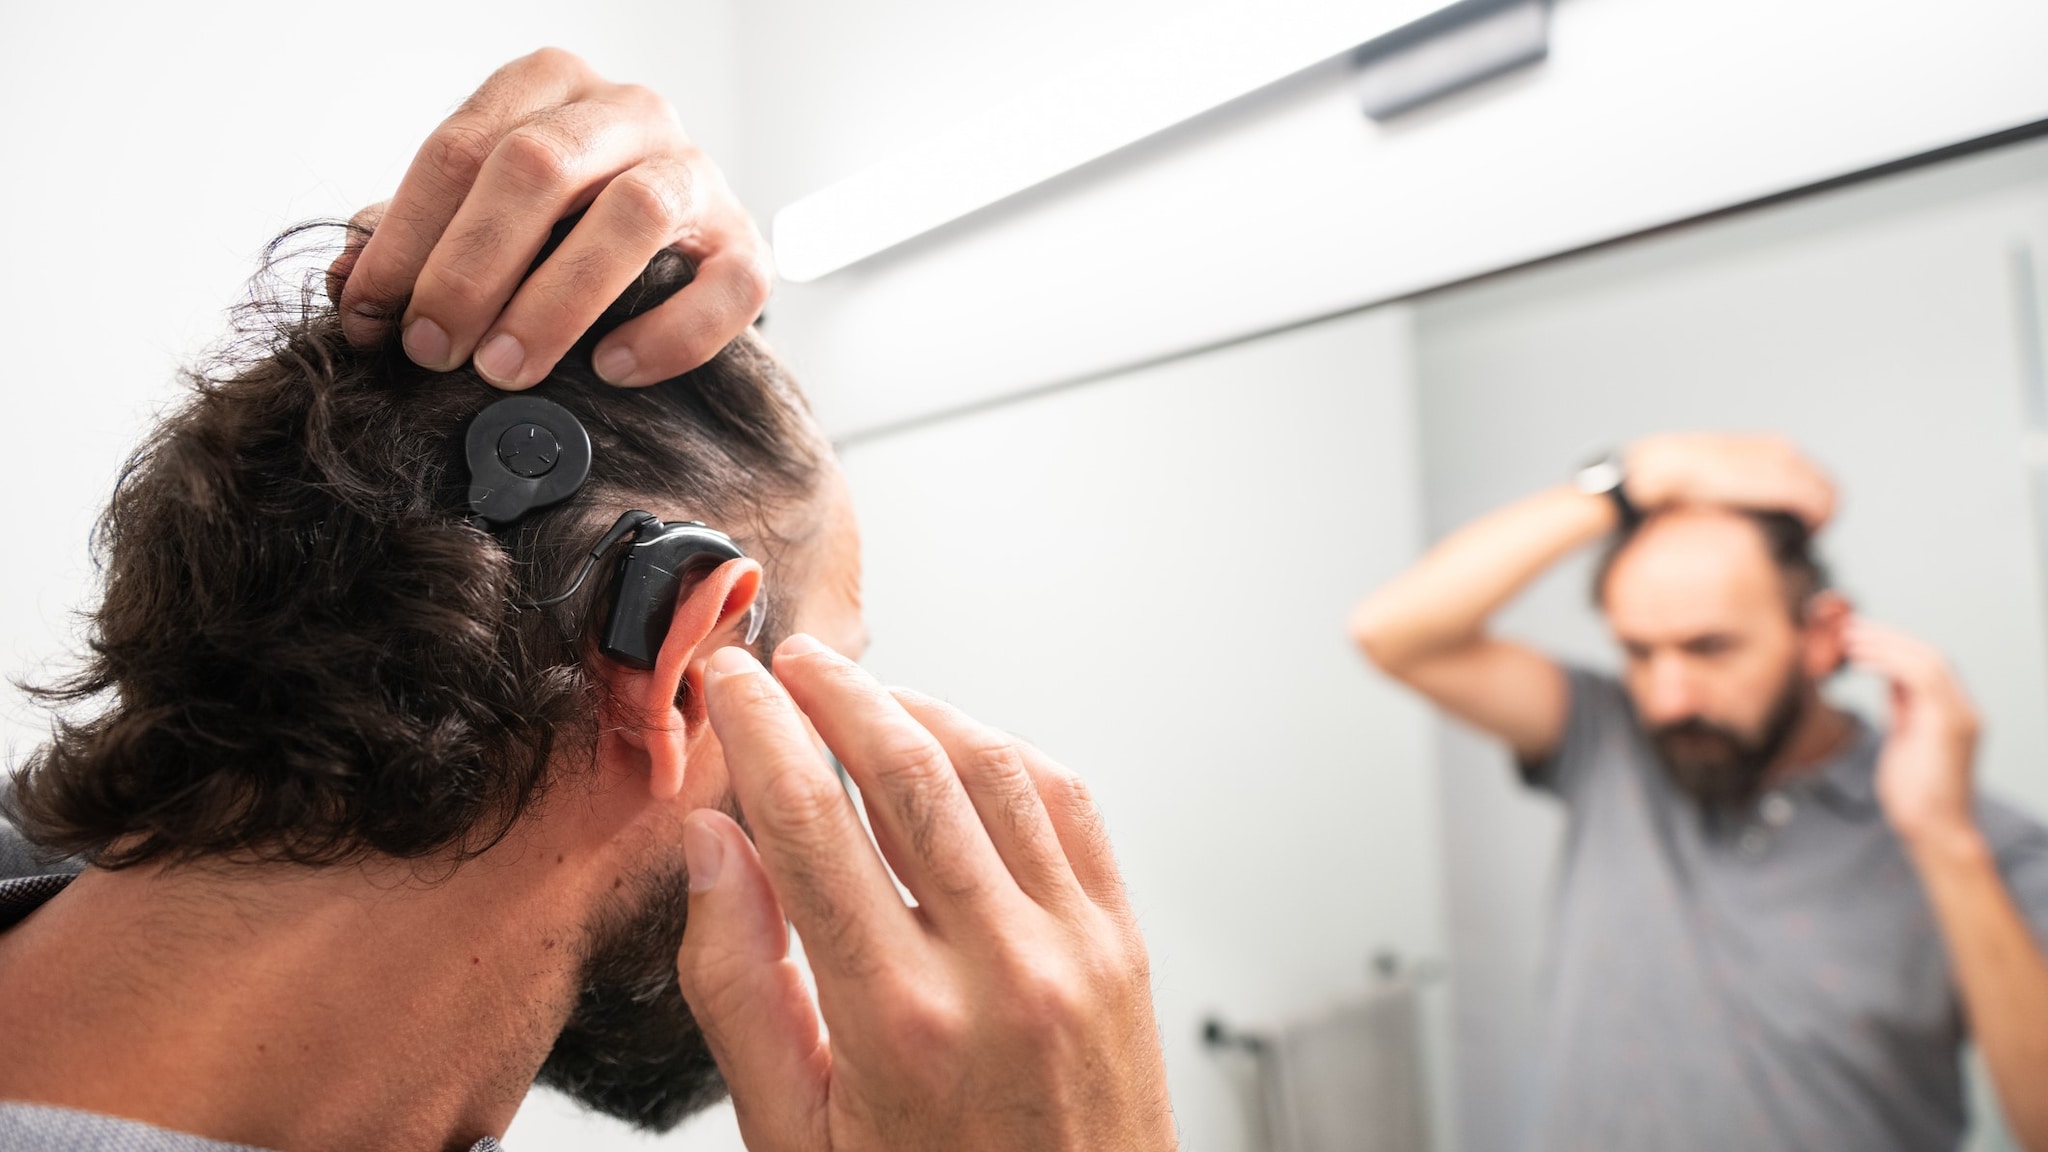 Man adjusting his cochlear implant in the mirror in his home bathroom.